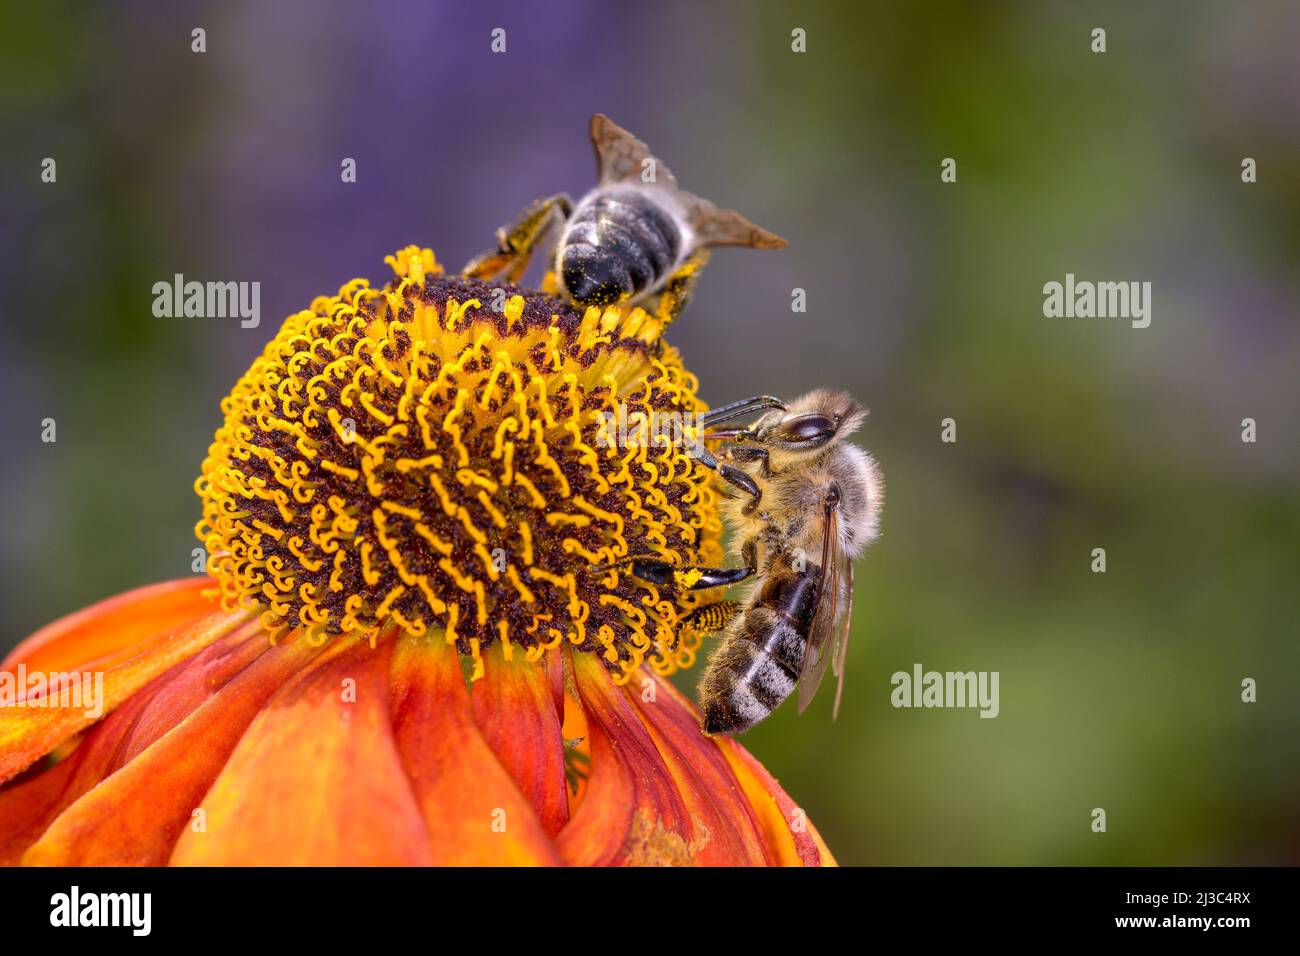 Bee - Apis Mellifera - Pollinates A Blossom Of The Common Sneezeweed Or Large-flowered Sneezeweed - Helenium Autumnale Stock Photo